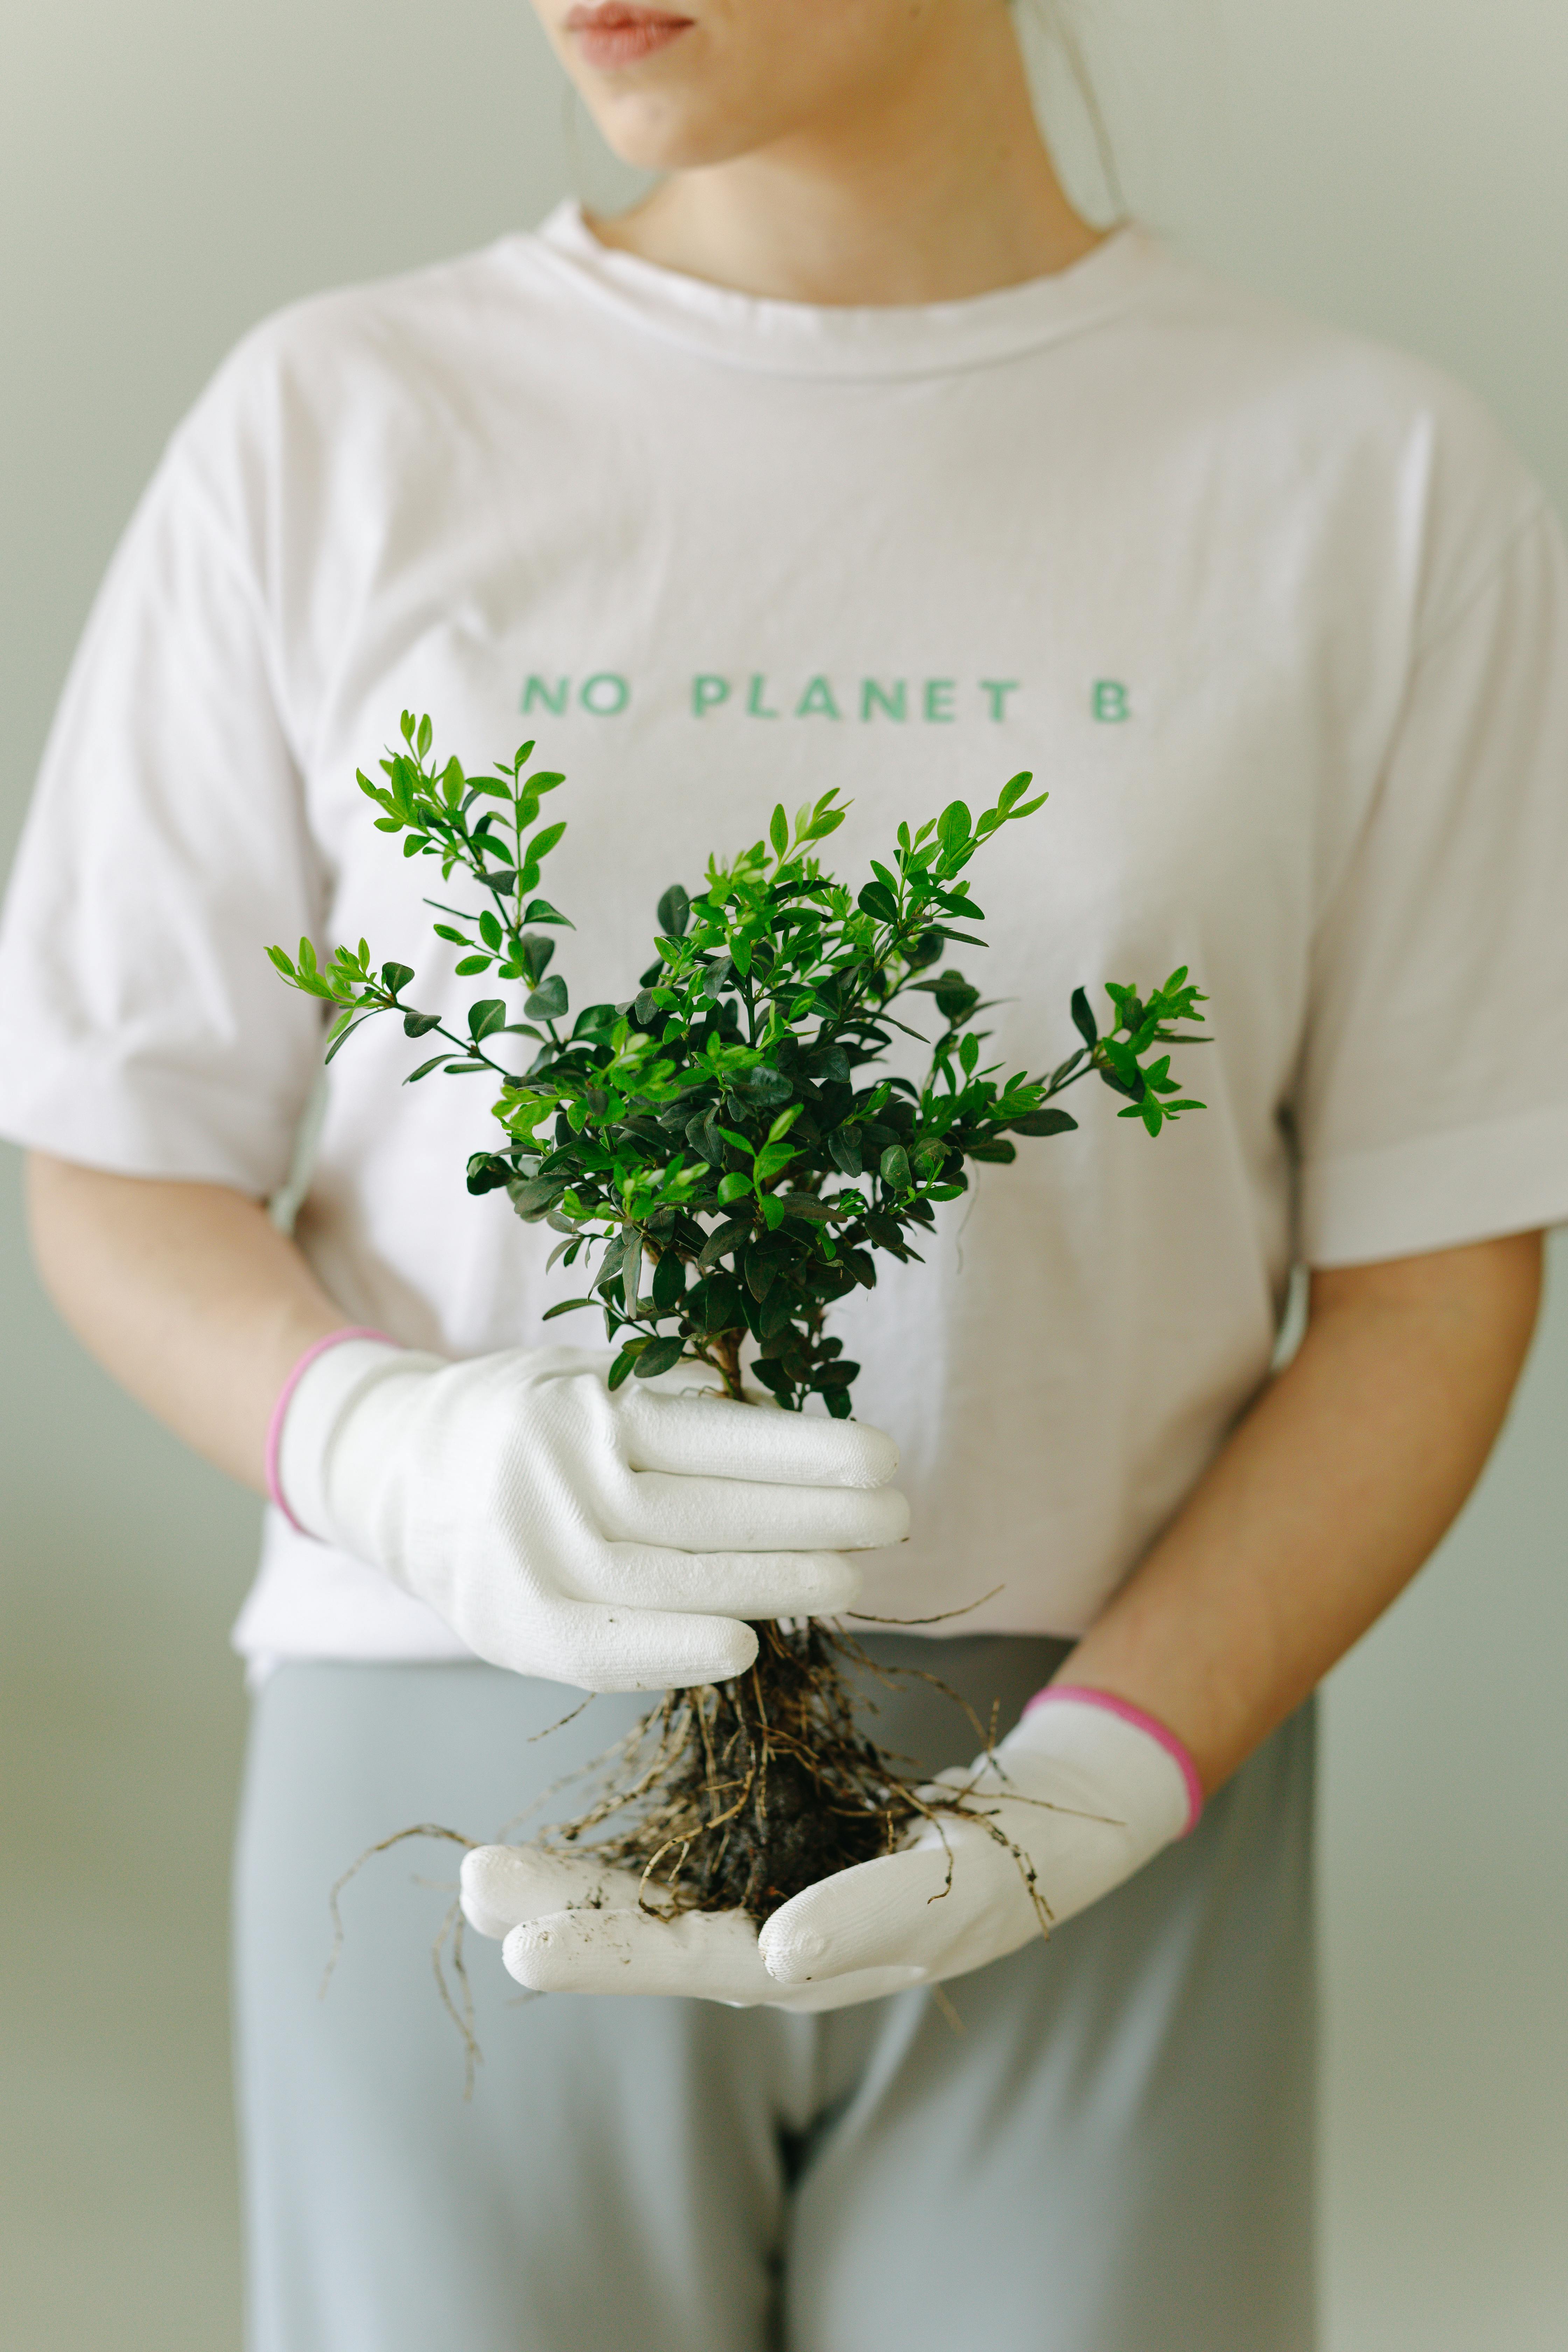 person in white crew neck t shirt wearing gloves while holding green plant